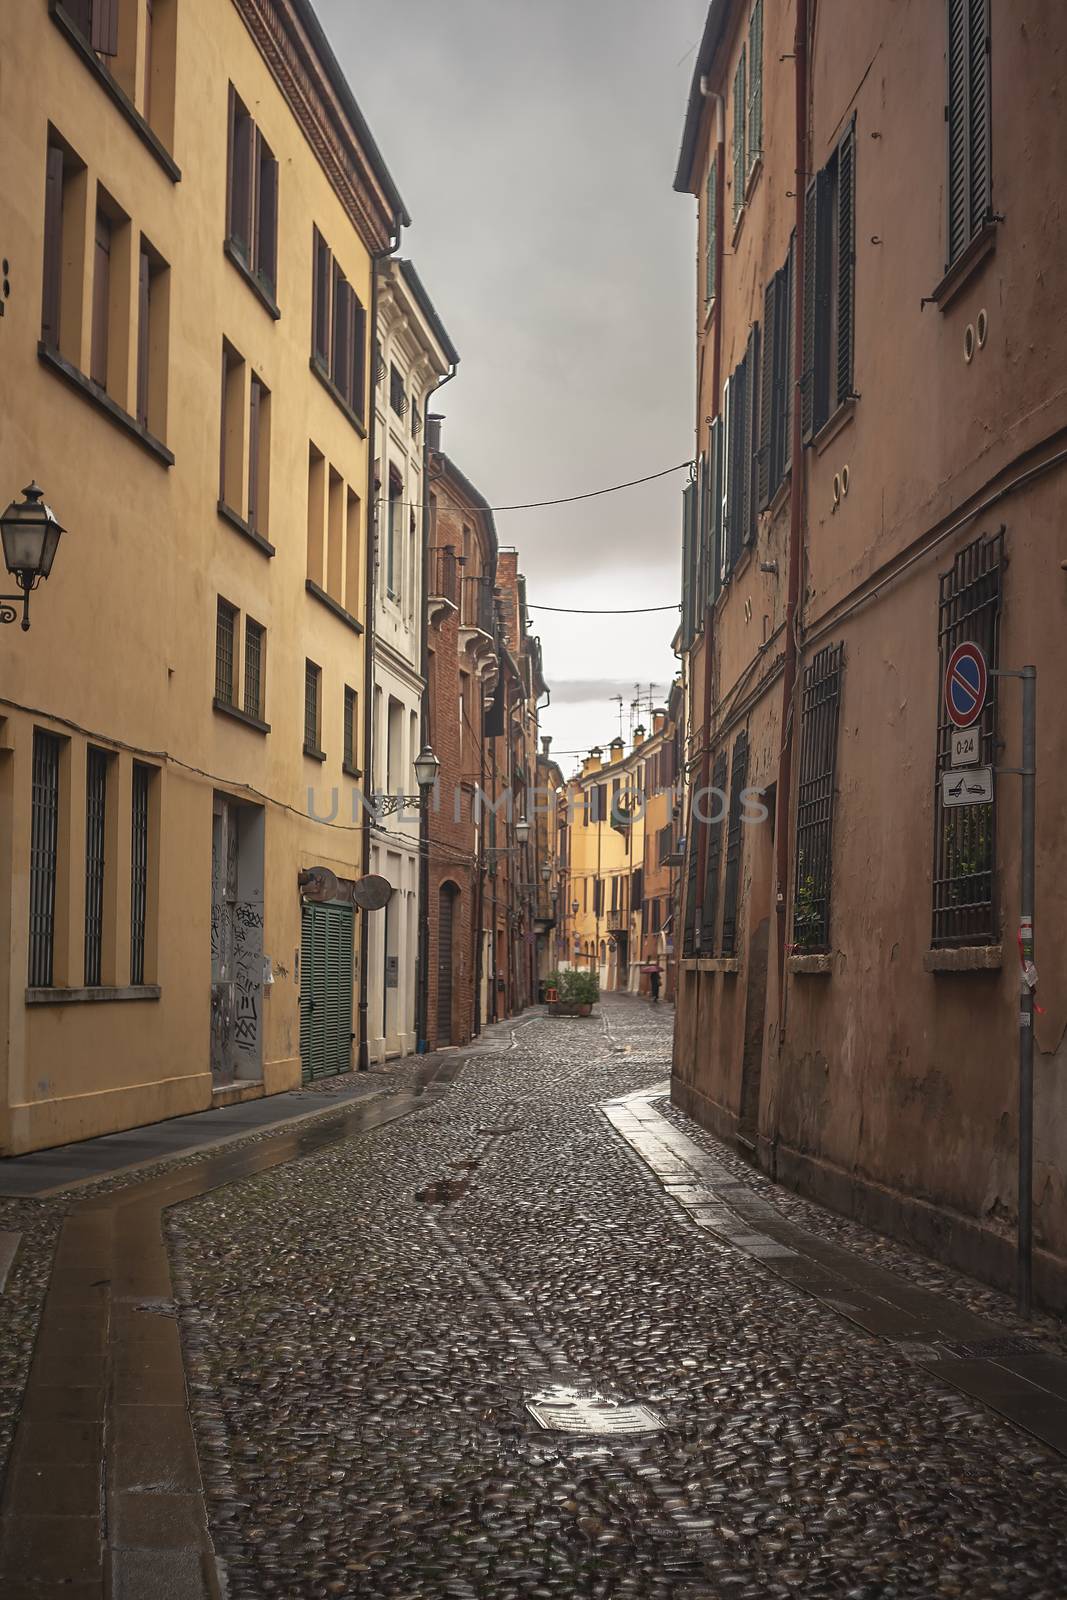 An historical alley in Ferrara in Italy by pippocarlot